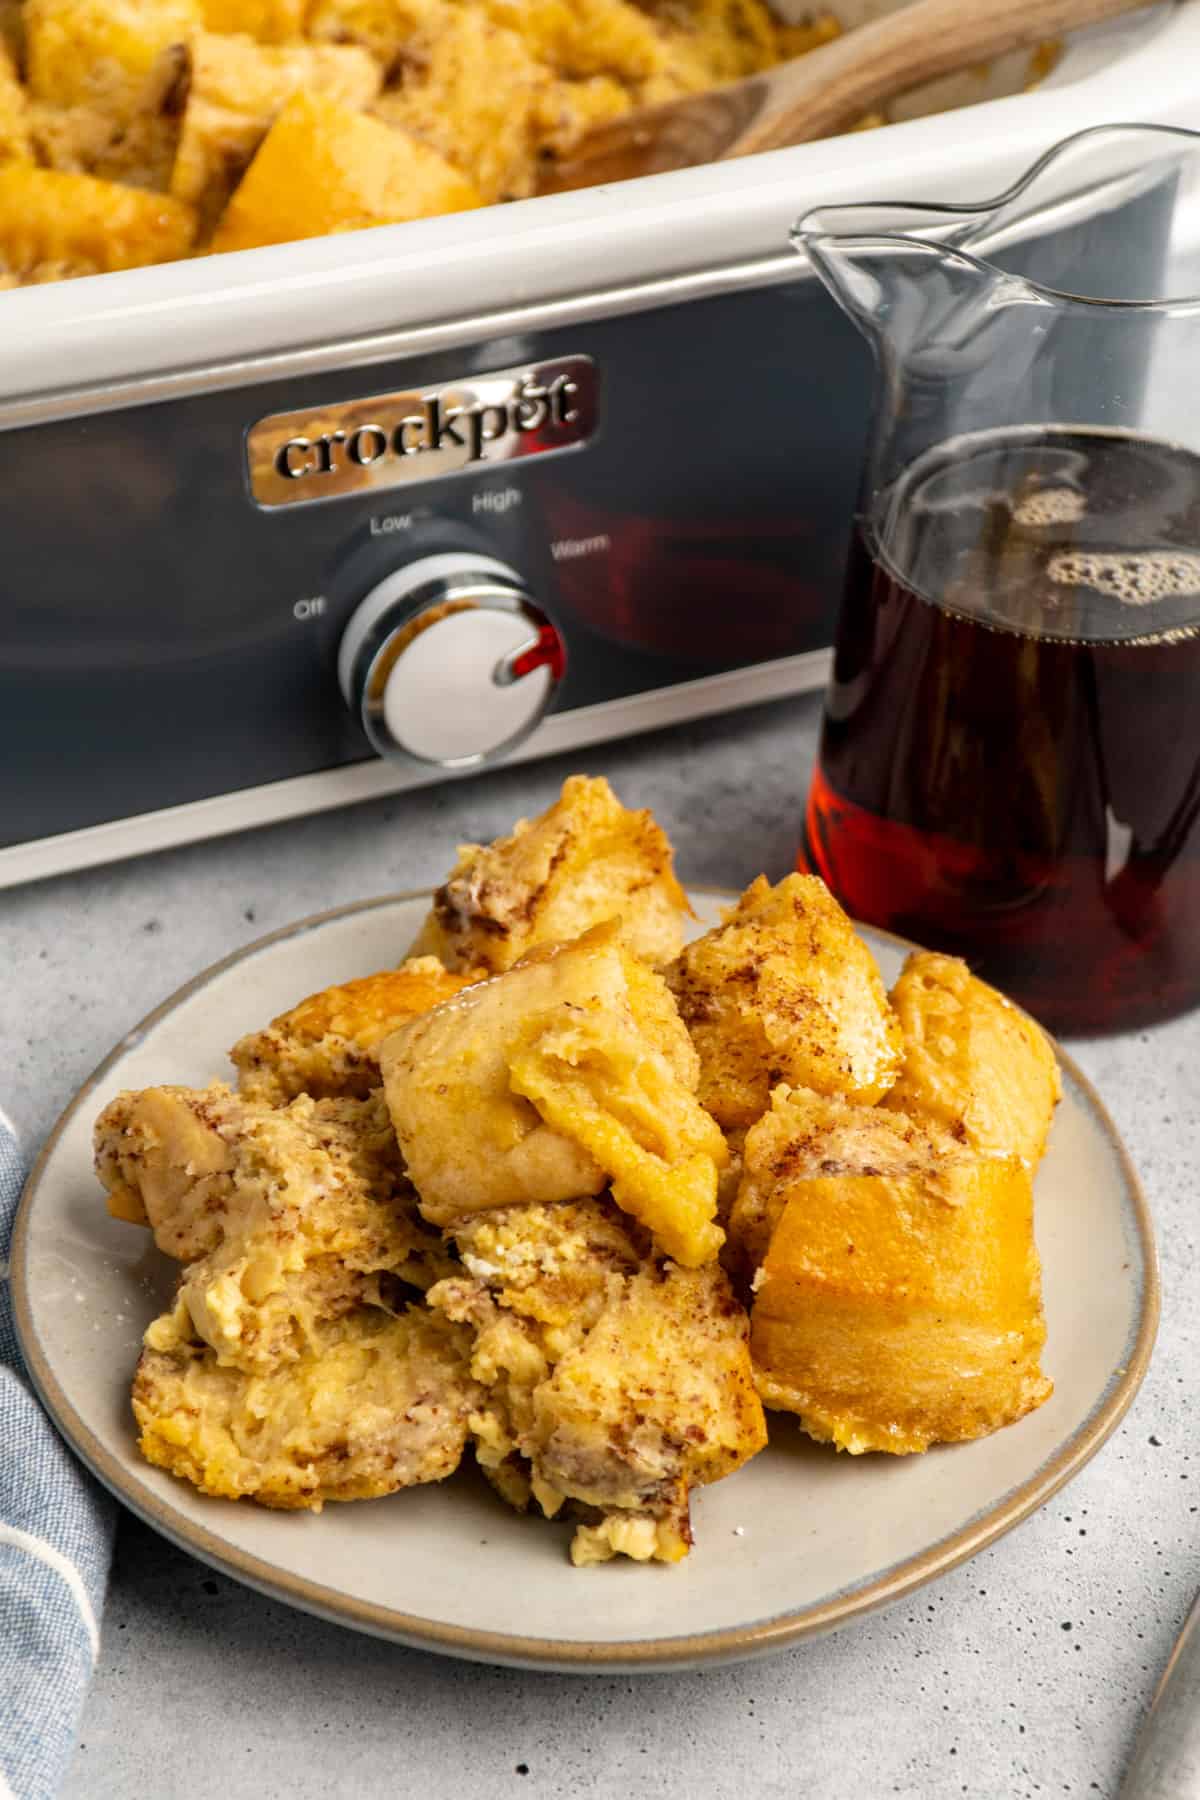 Crock-Pot French toast on a plate with a slow cooker in the background.